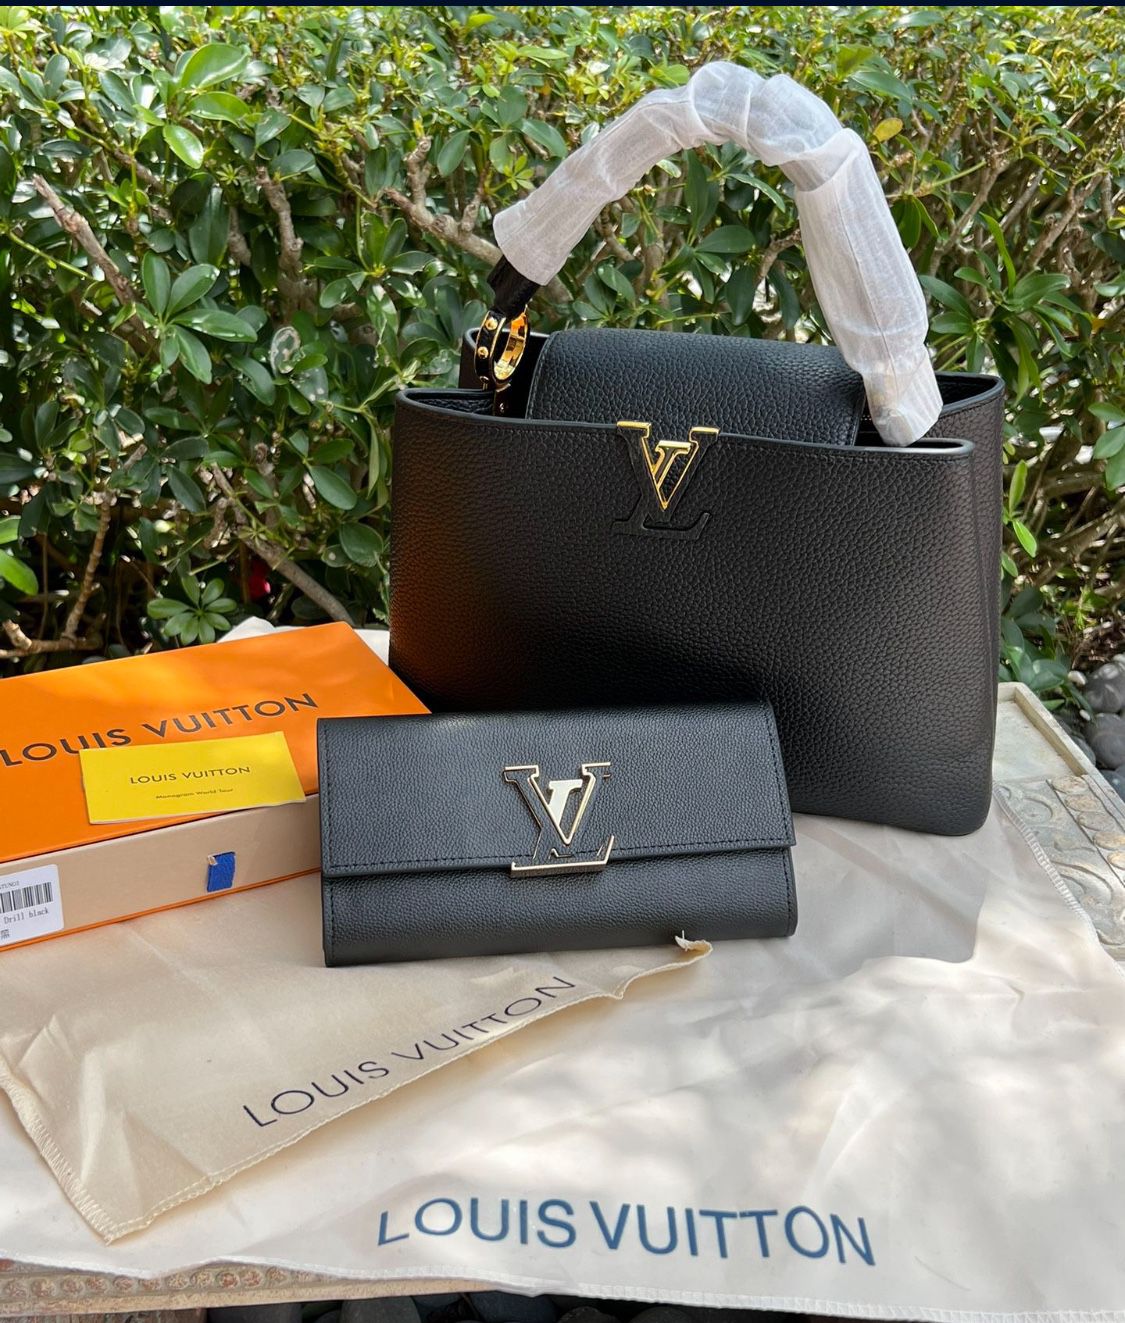 LV Capucine Bag And Matching Wallet